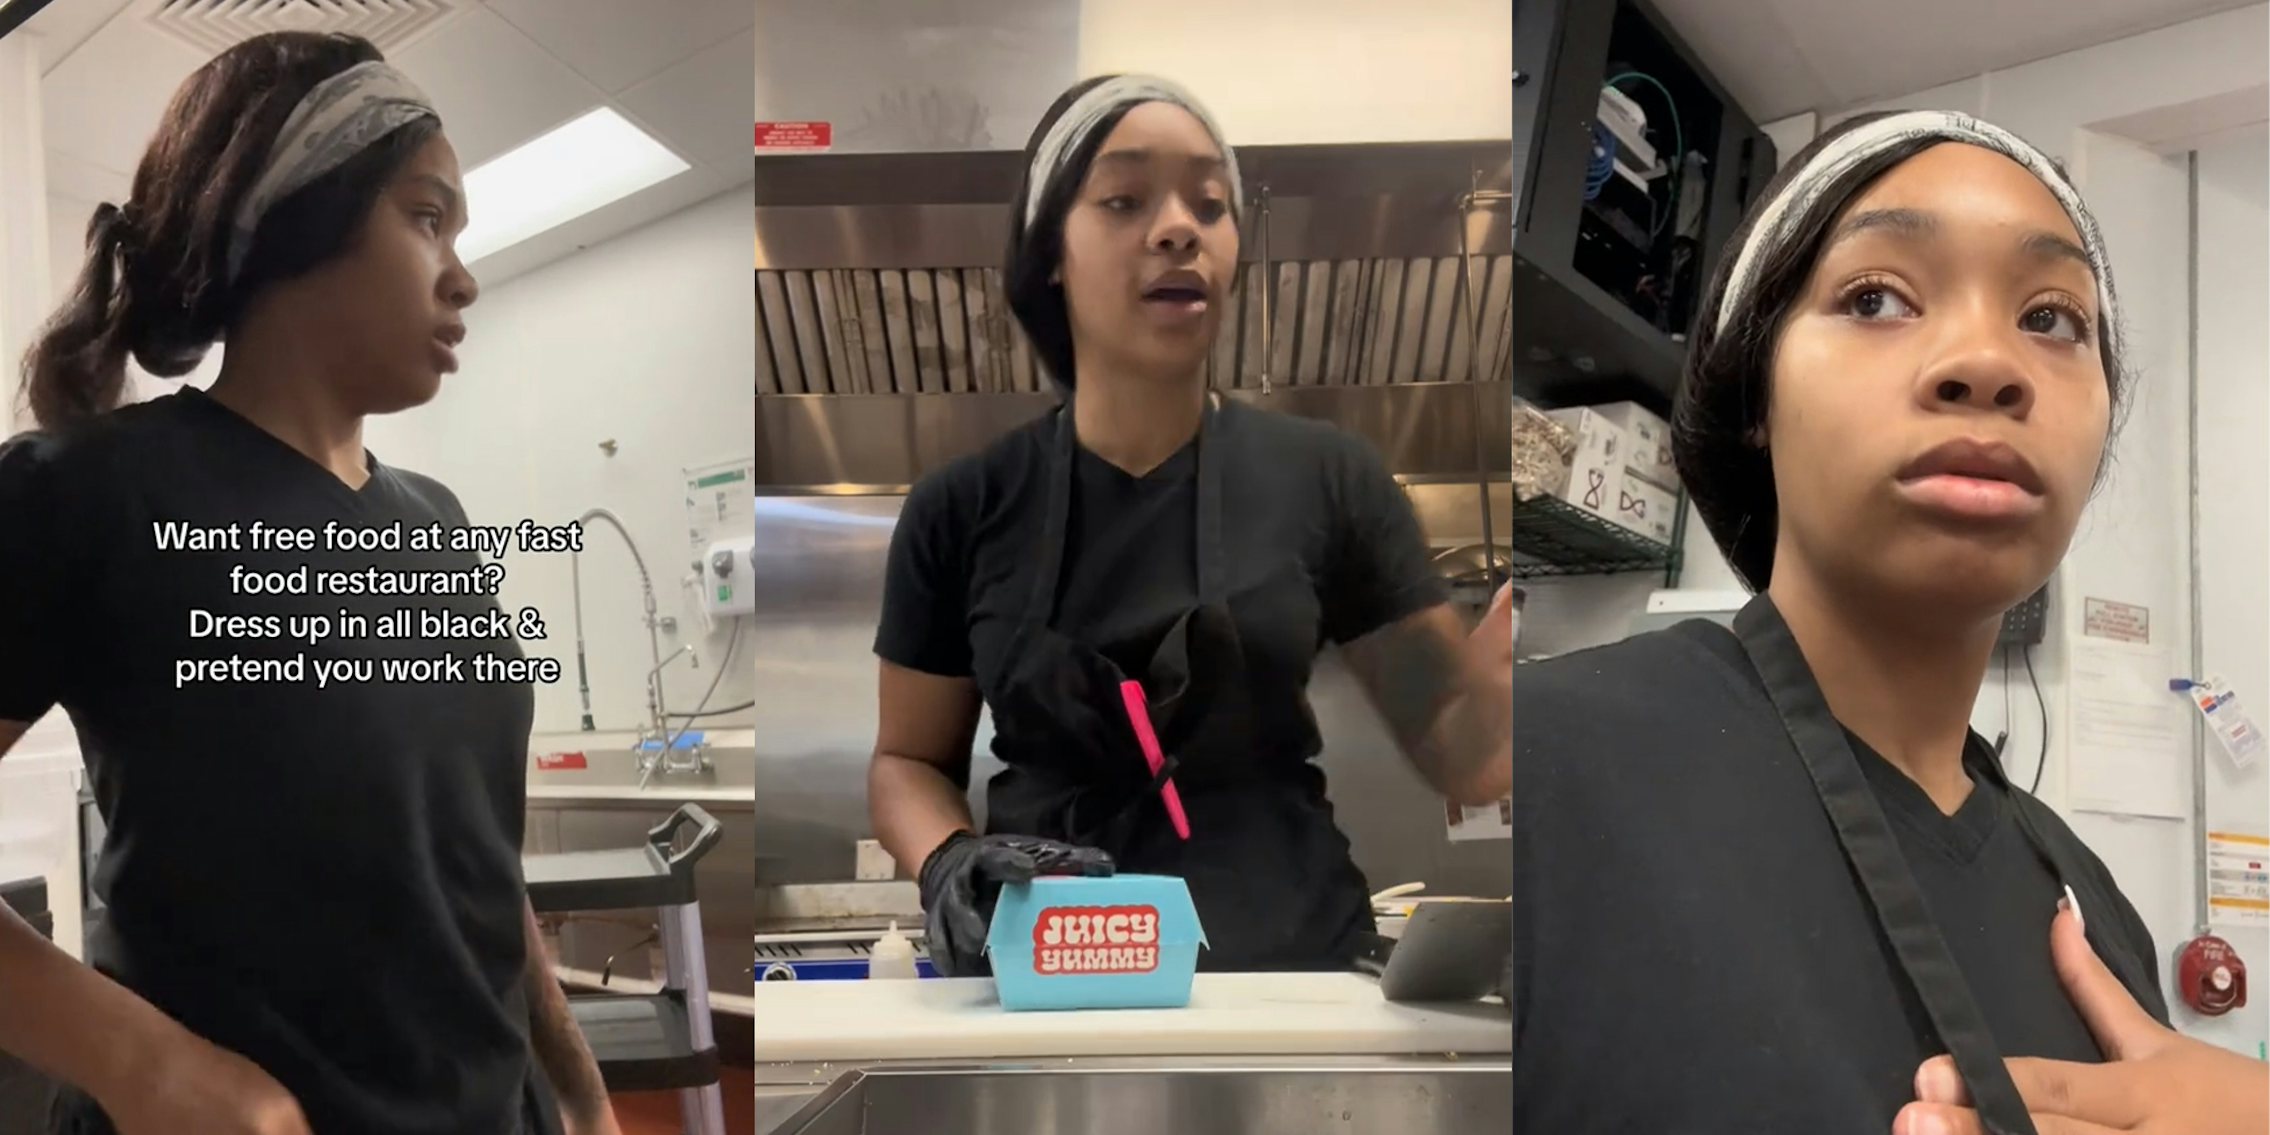 Woman dresses up in all black and pretends to work at restaurant. Workers give her free food